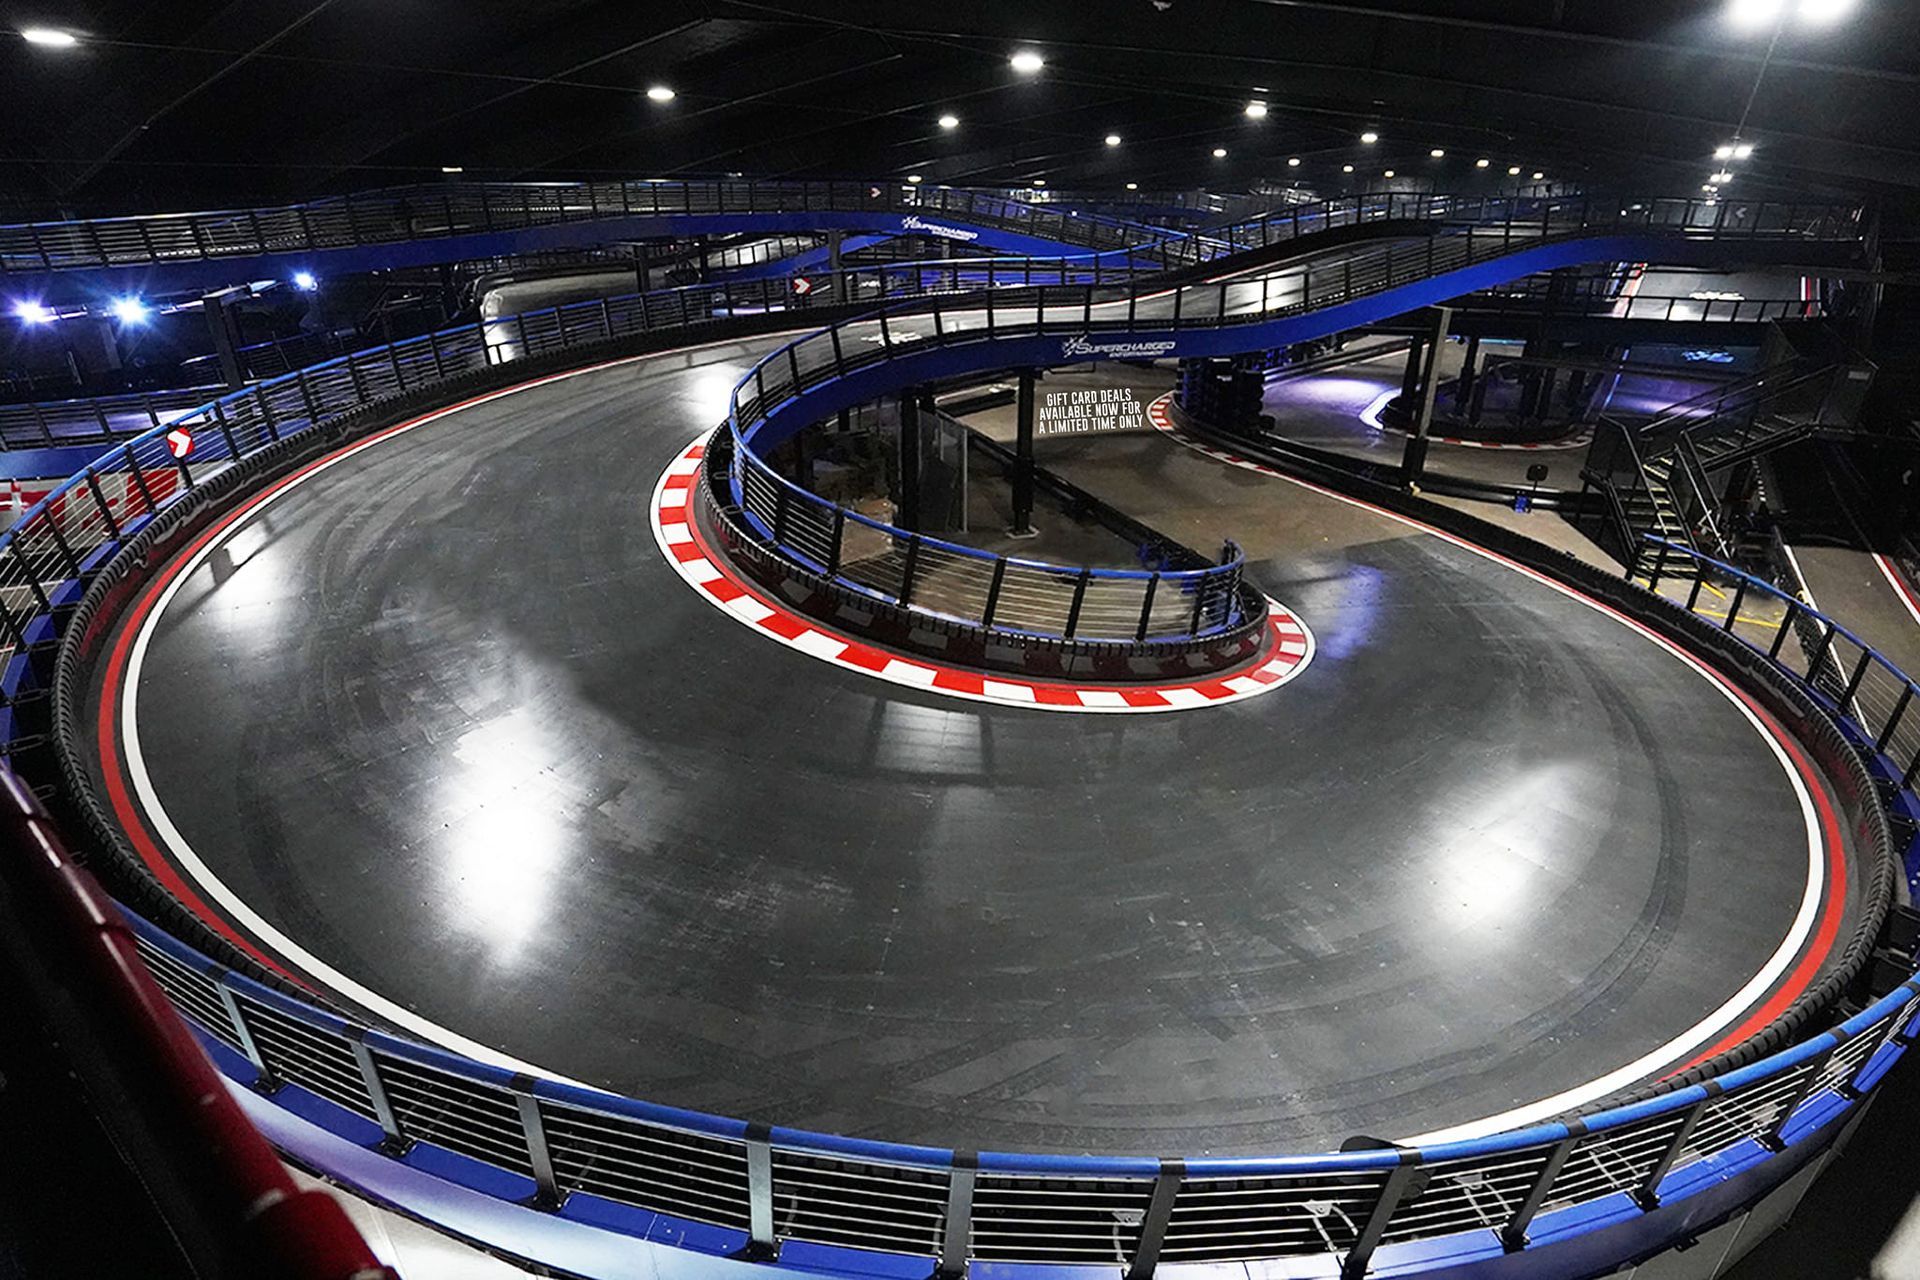 World's Largest Indoor Multi-Level Karting Track: world record in Edison, New Jersey